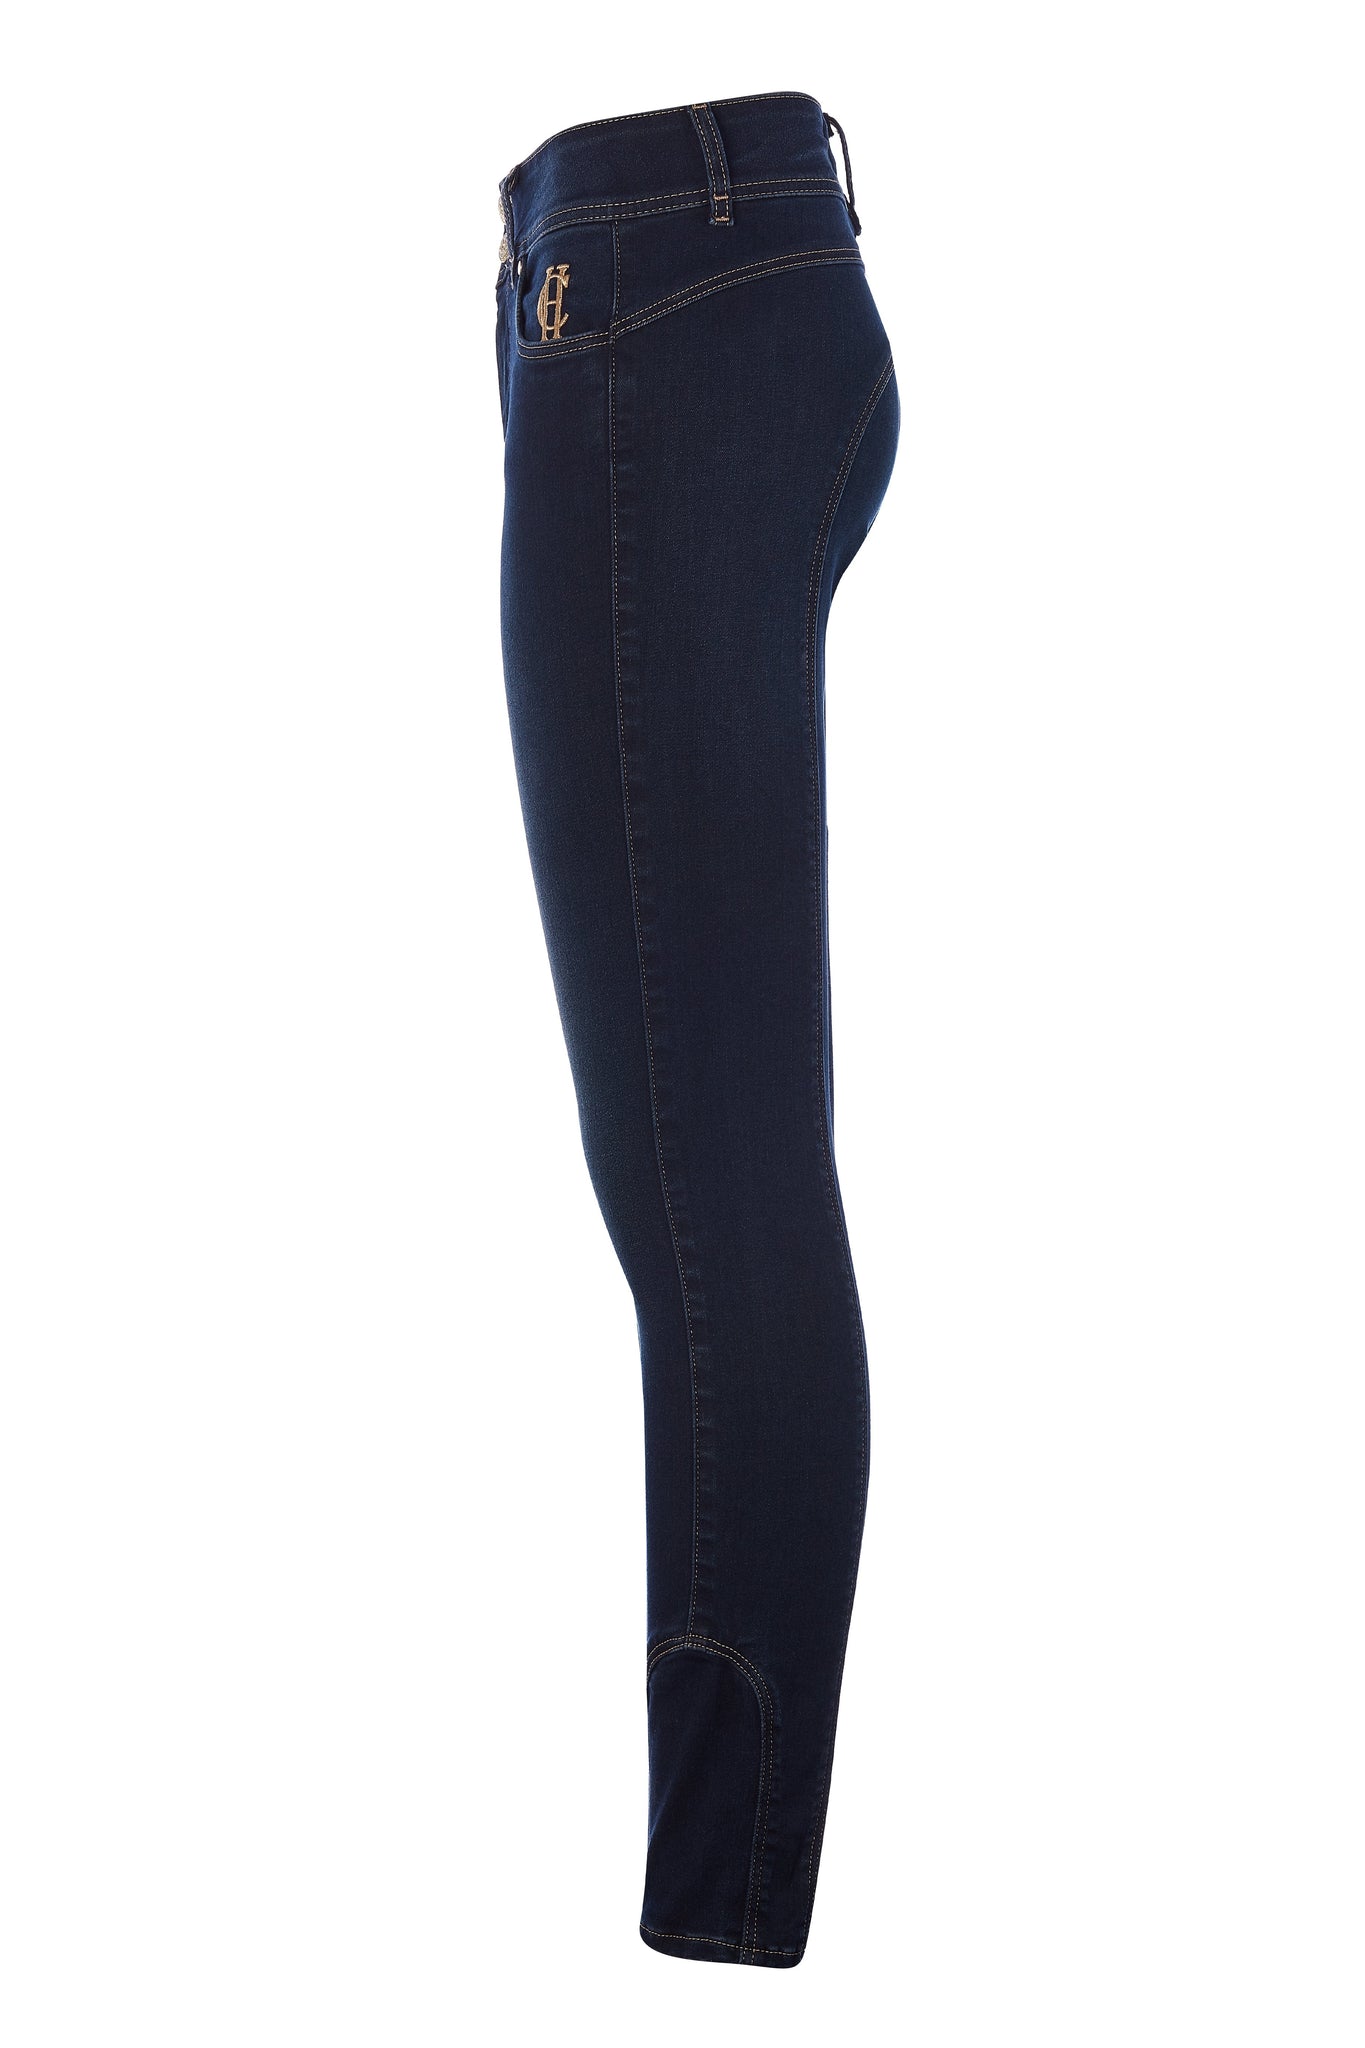 side of womens high rise dark blue denim skinny stretch jean with jodhpur style seam and two open pockets to the front with hc embroidery on front left pocket